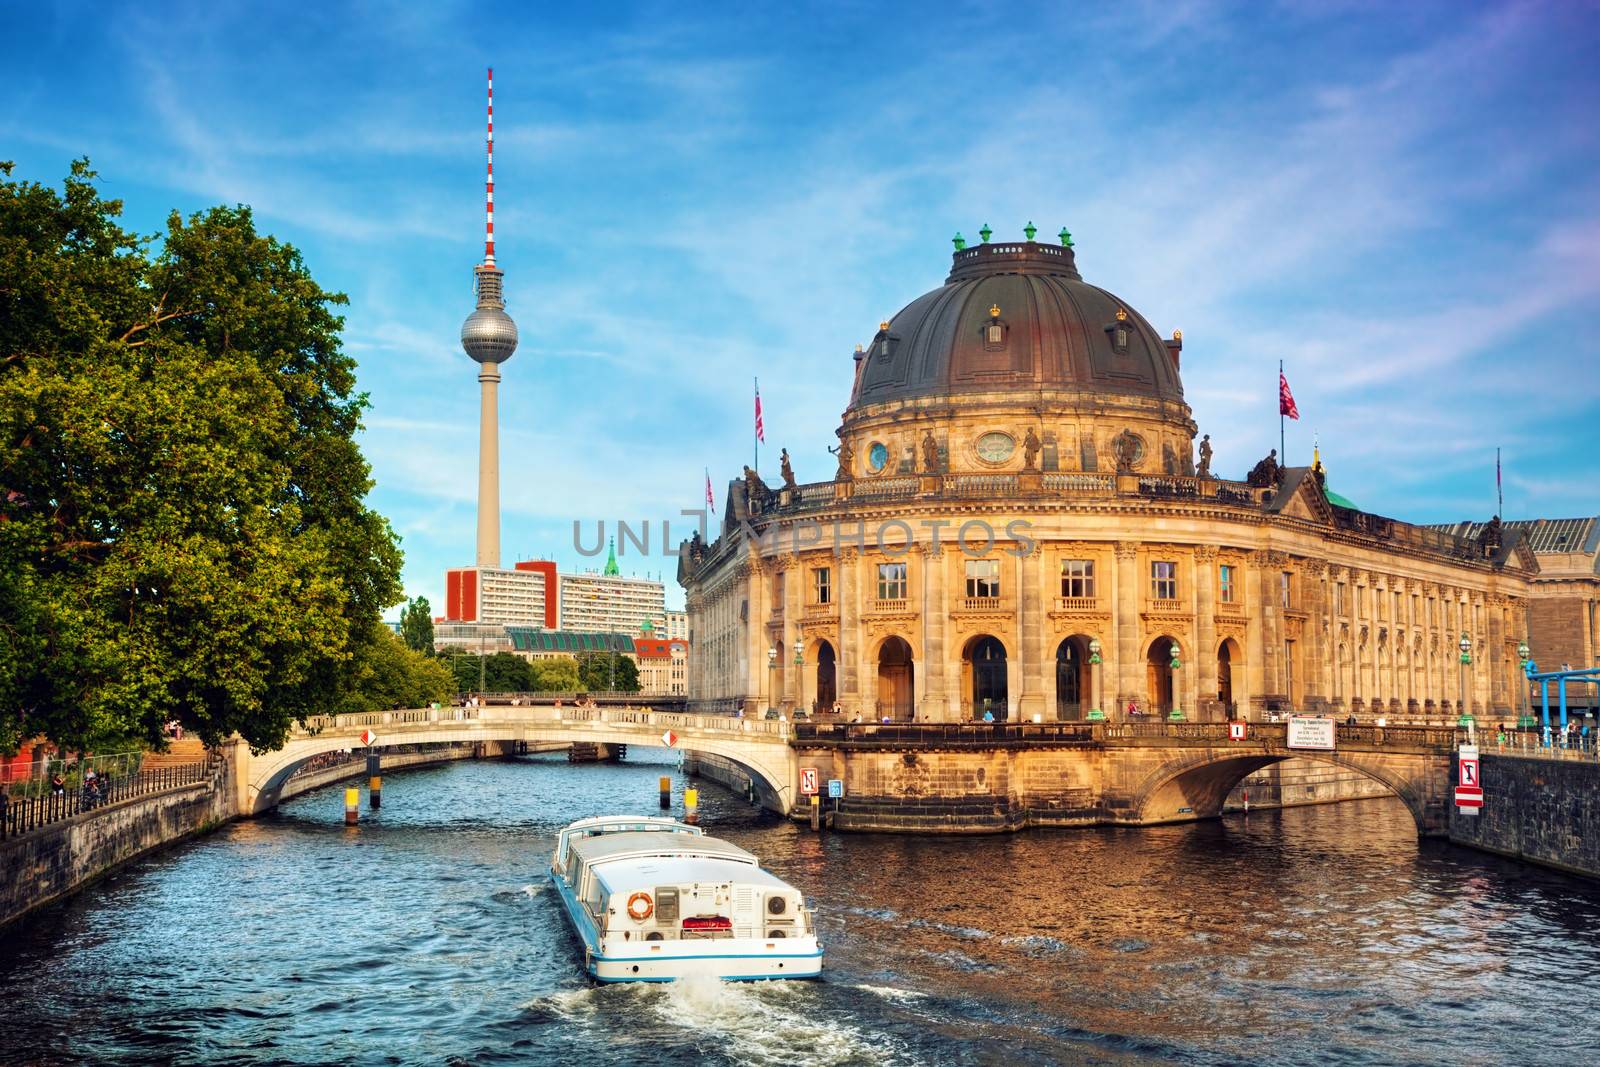 The Bode Museum, Berlin, Germany by photocreo